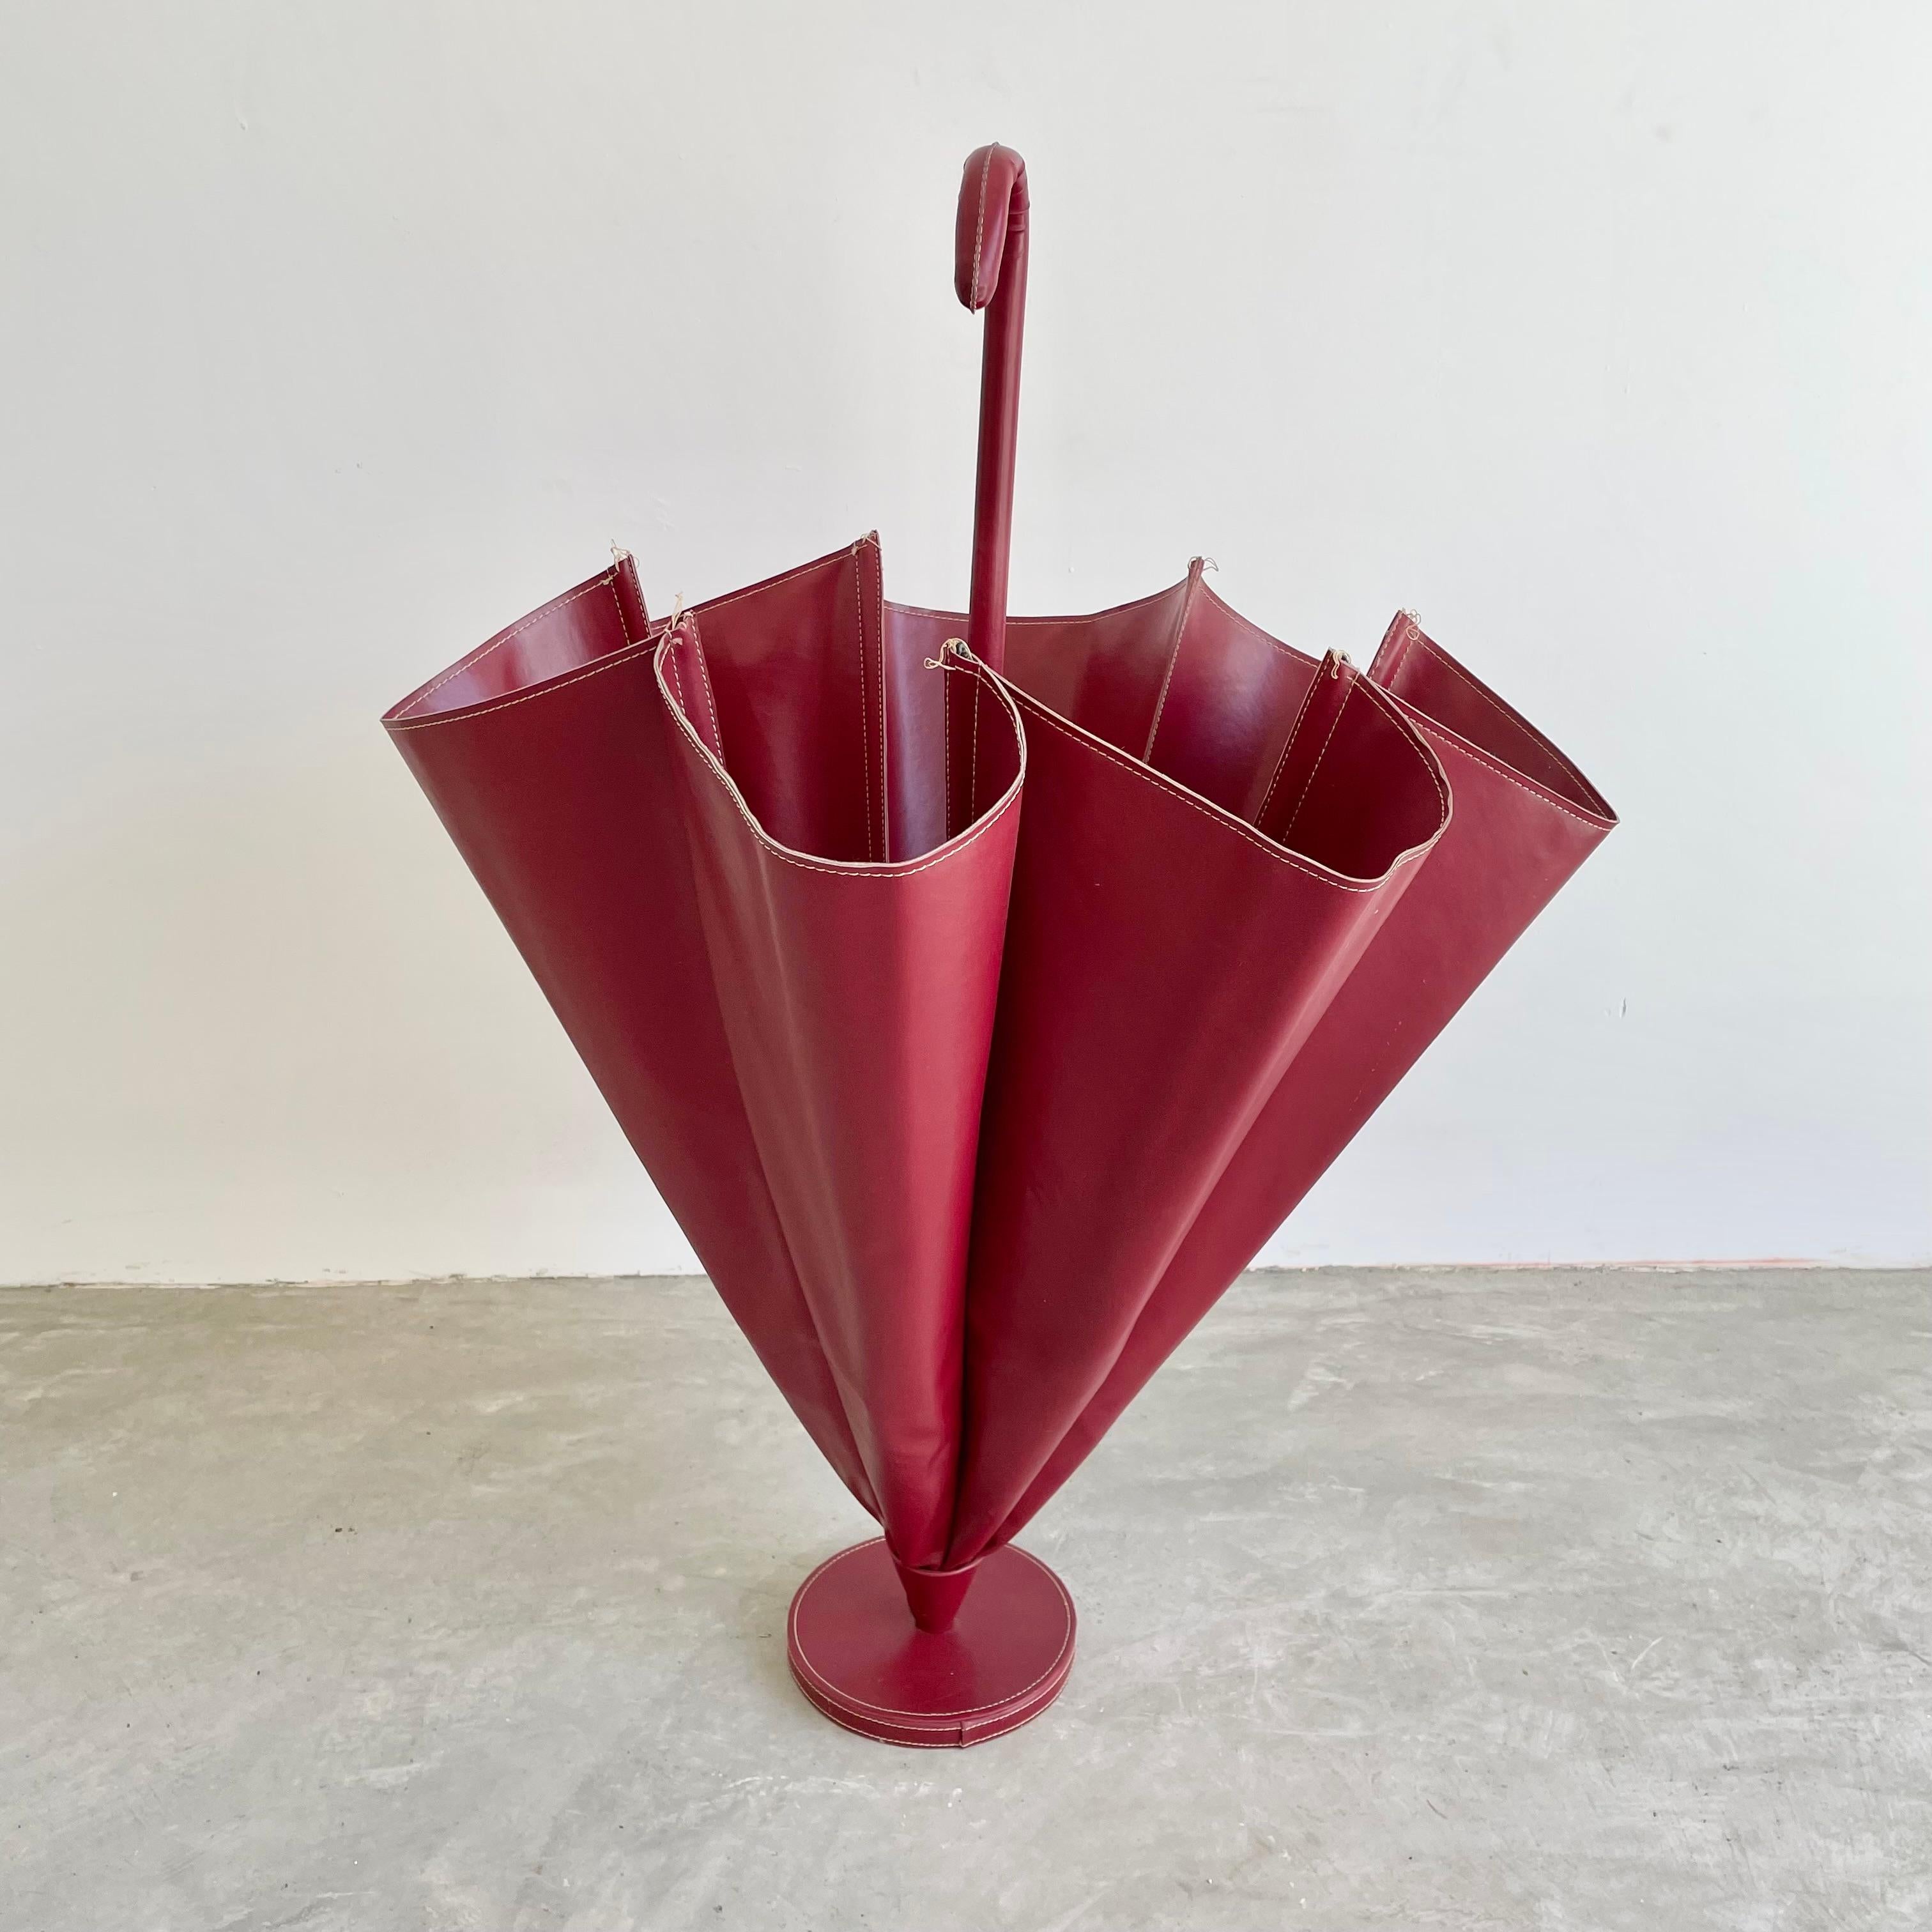 Brass Jacques Adnet Style Red Skai Umbrella Stand, 1950s France